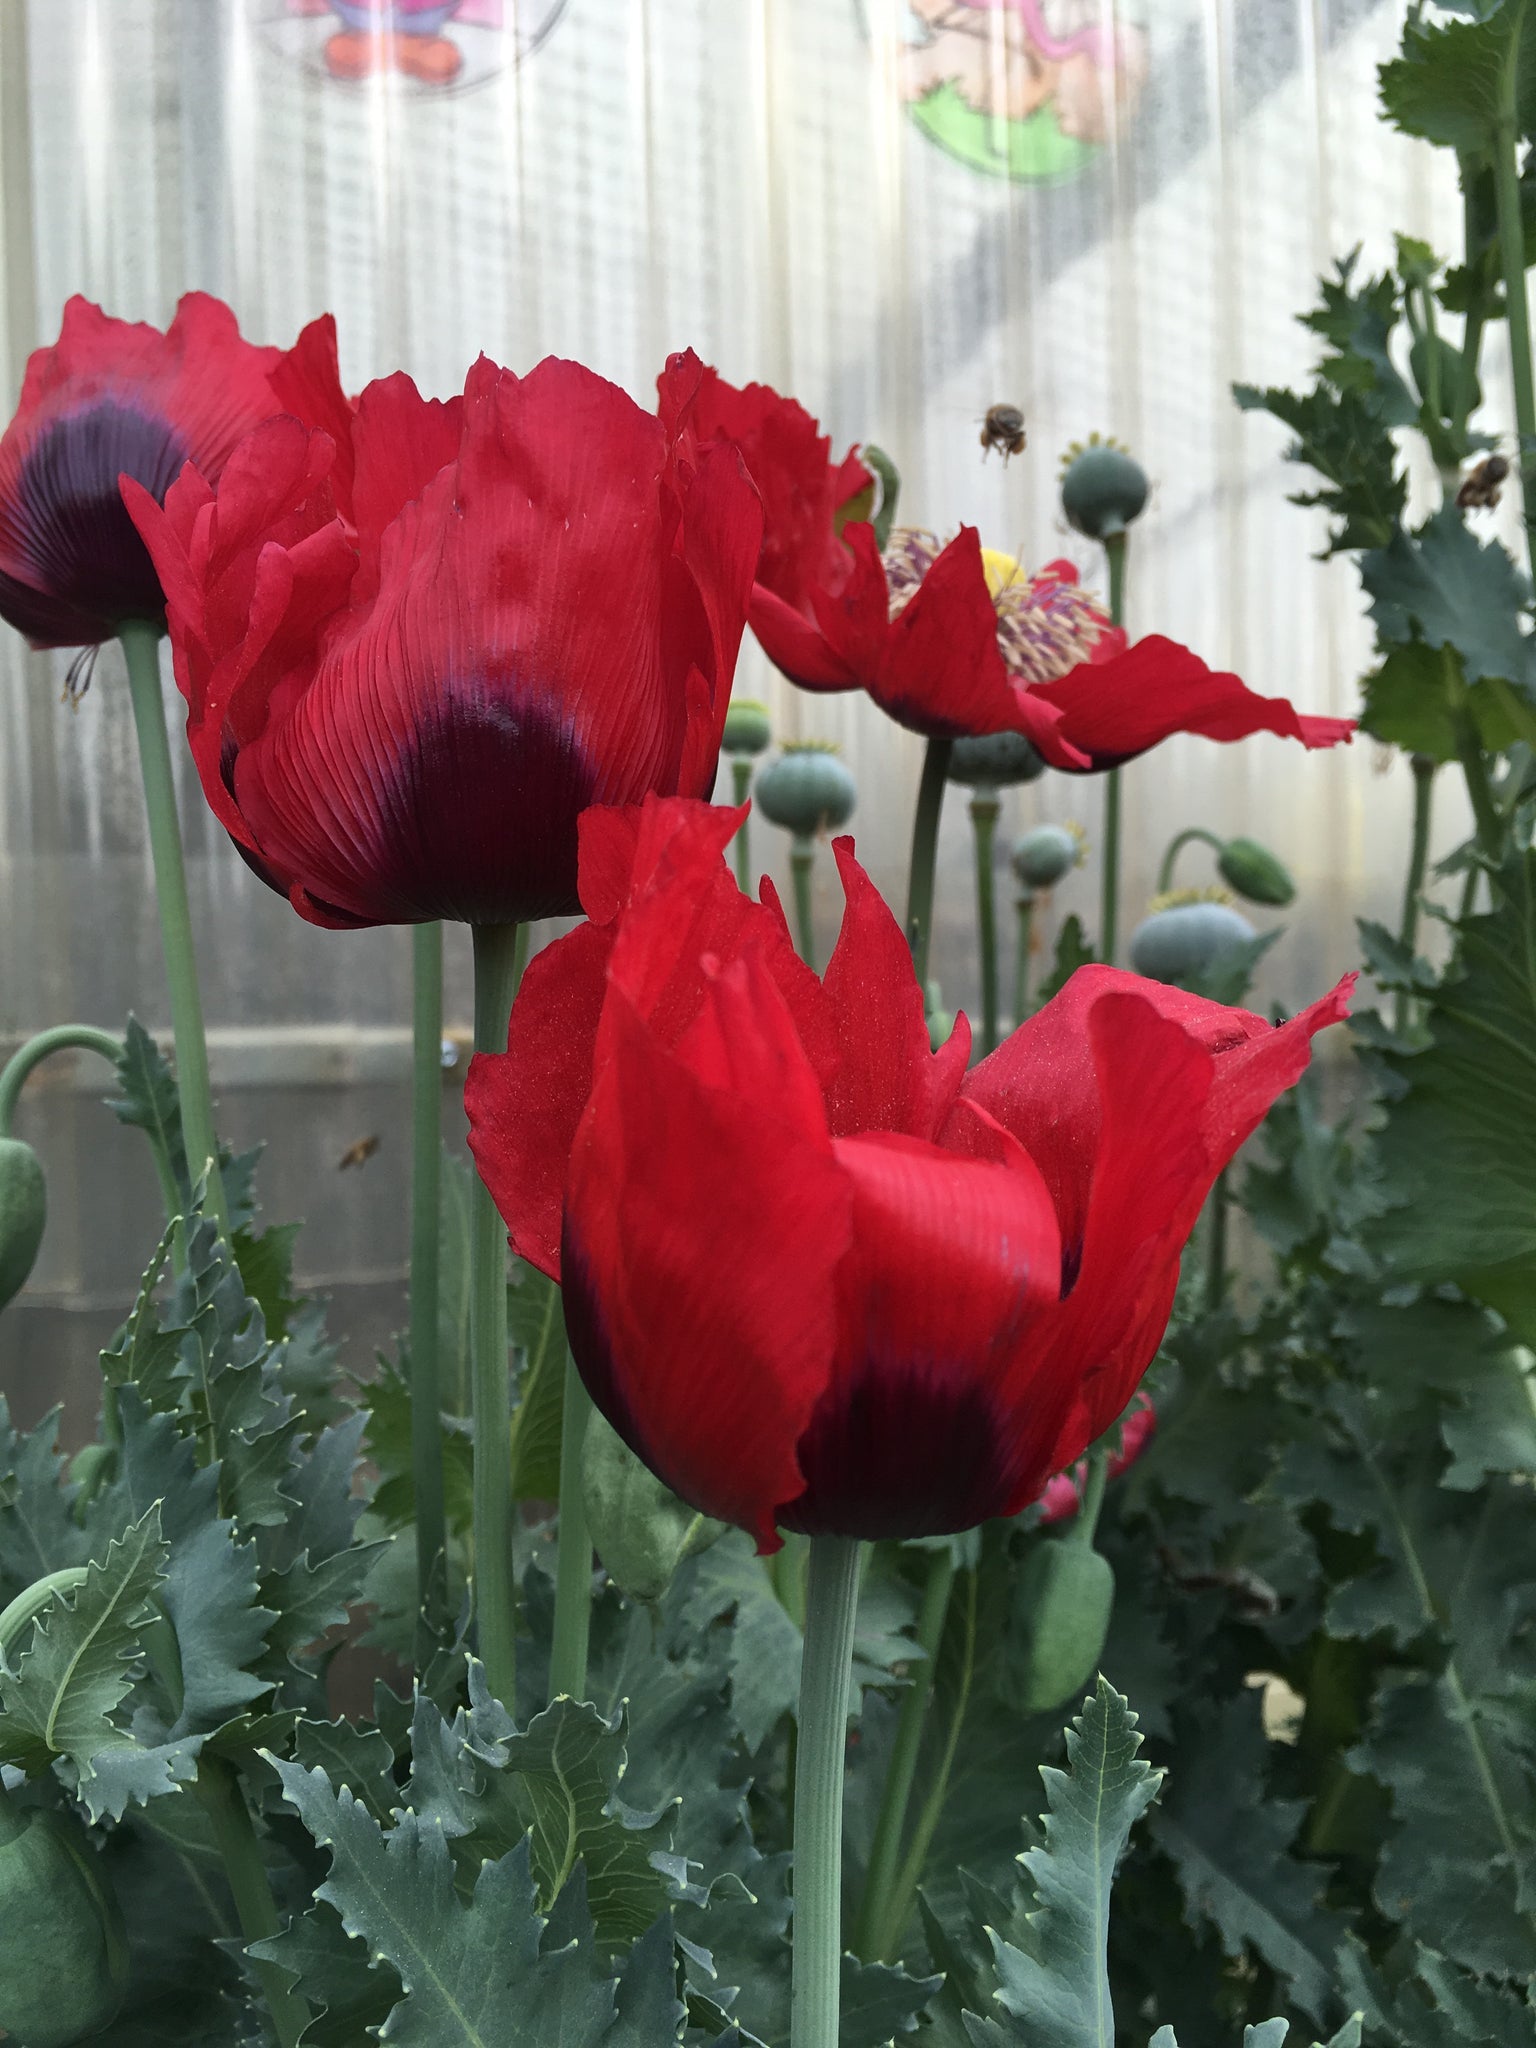 The power of the poppy: Exploring opium through The Wizard of Oz